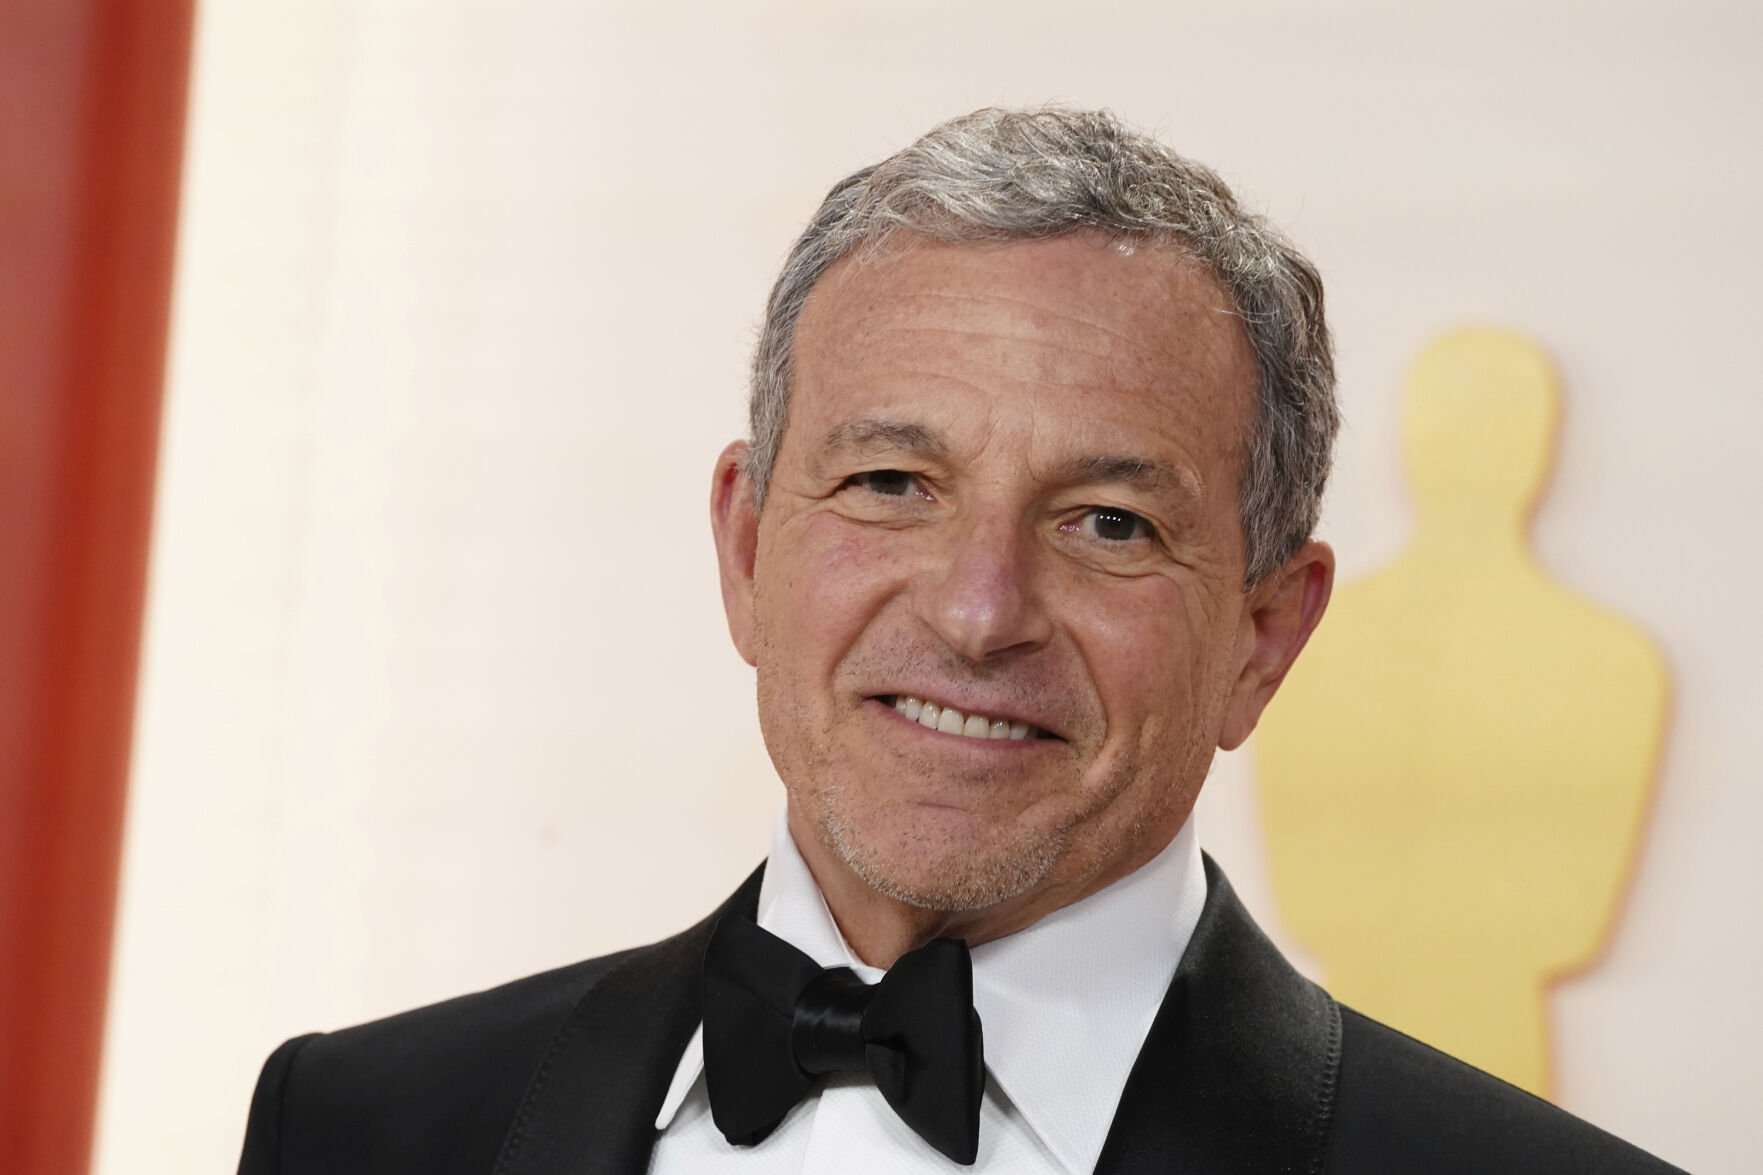 <p>FILE - Bob Iger arrives at the Oscars on March 12, 2023, at the Dolby Theatre in Los Angeles. Disney CEO Iger on Monday, April 3, called efforts by Florida Gov. Ron DeSantis and the Republican-controlled Florida Legislature to retaliate against the company for its policy positions as not only “anti-business but anti-Florida.” (Photo by Jordan Strauss/Invision/AP, File)</p>   PHOTO CREDIT: Jordan Strauss - invision linkable, Invision